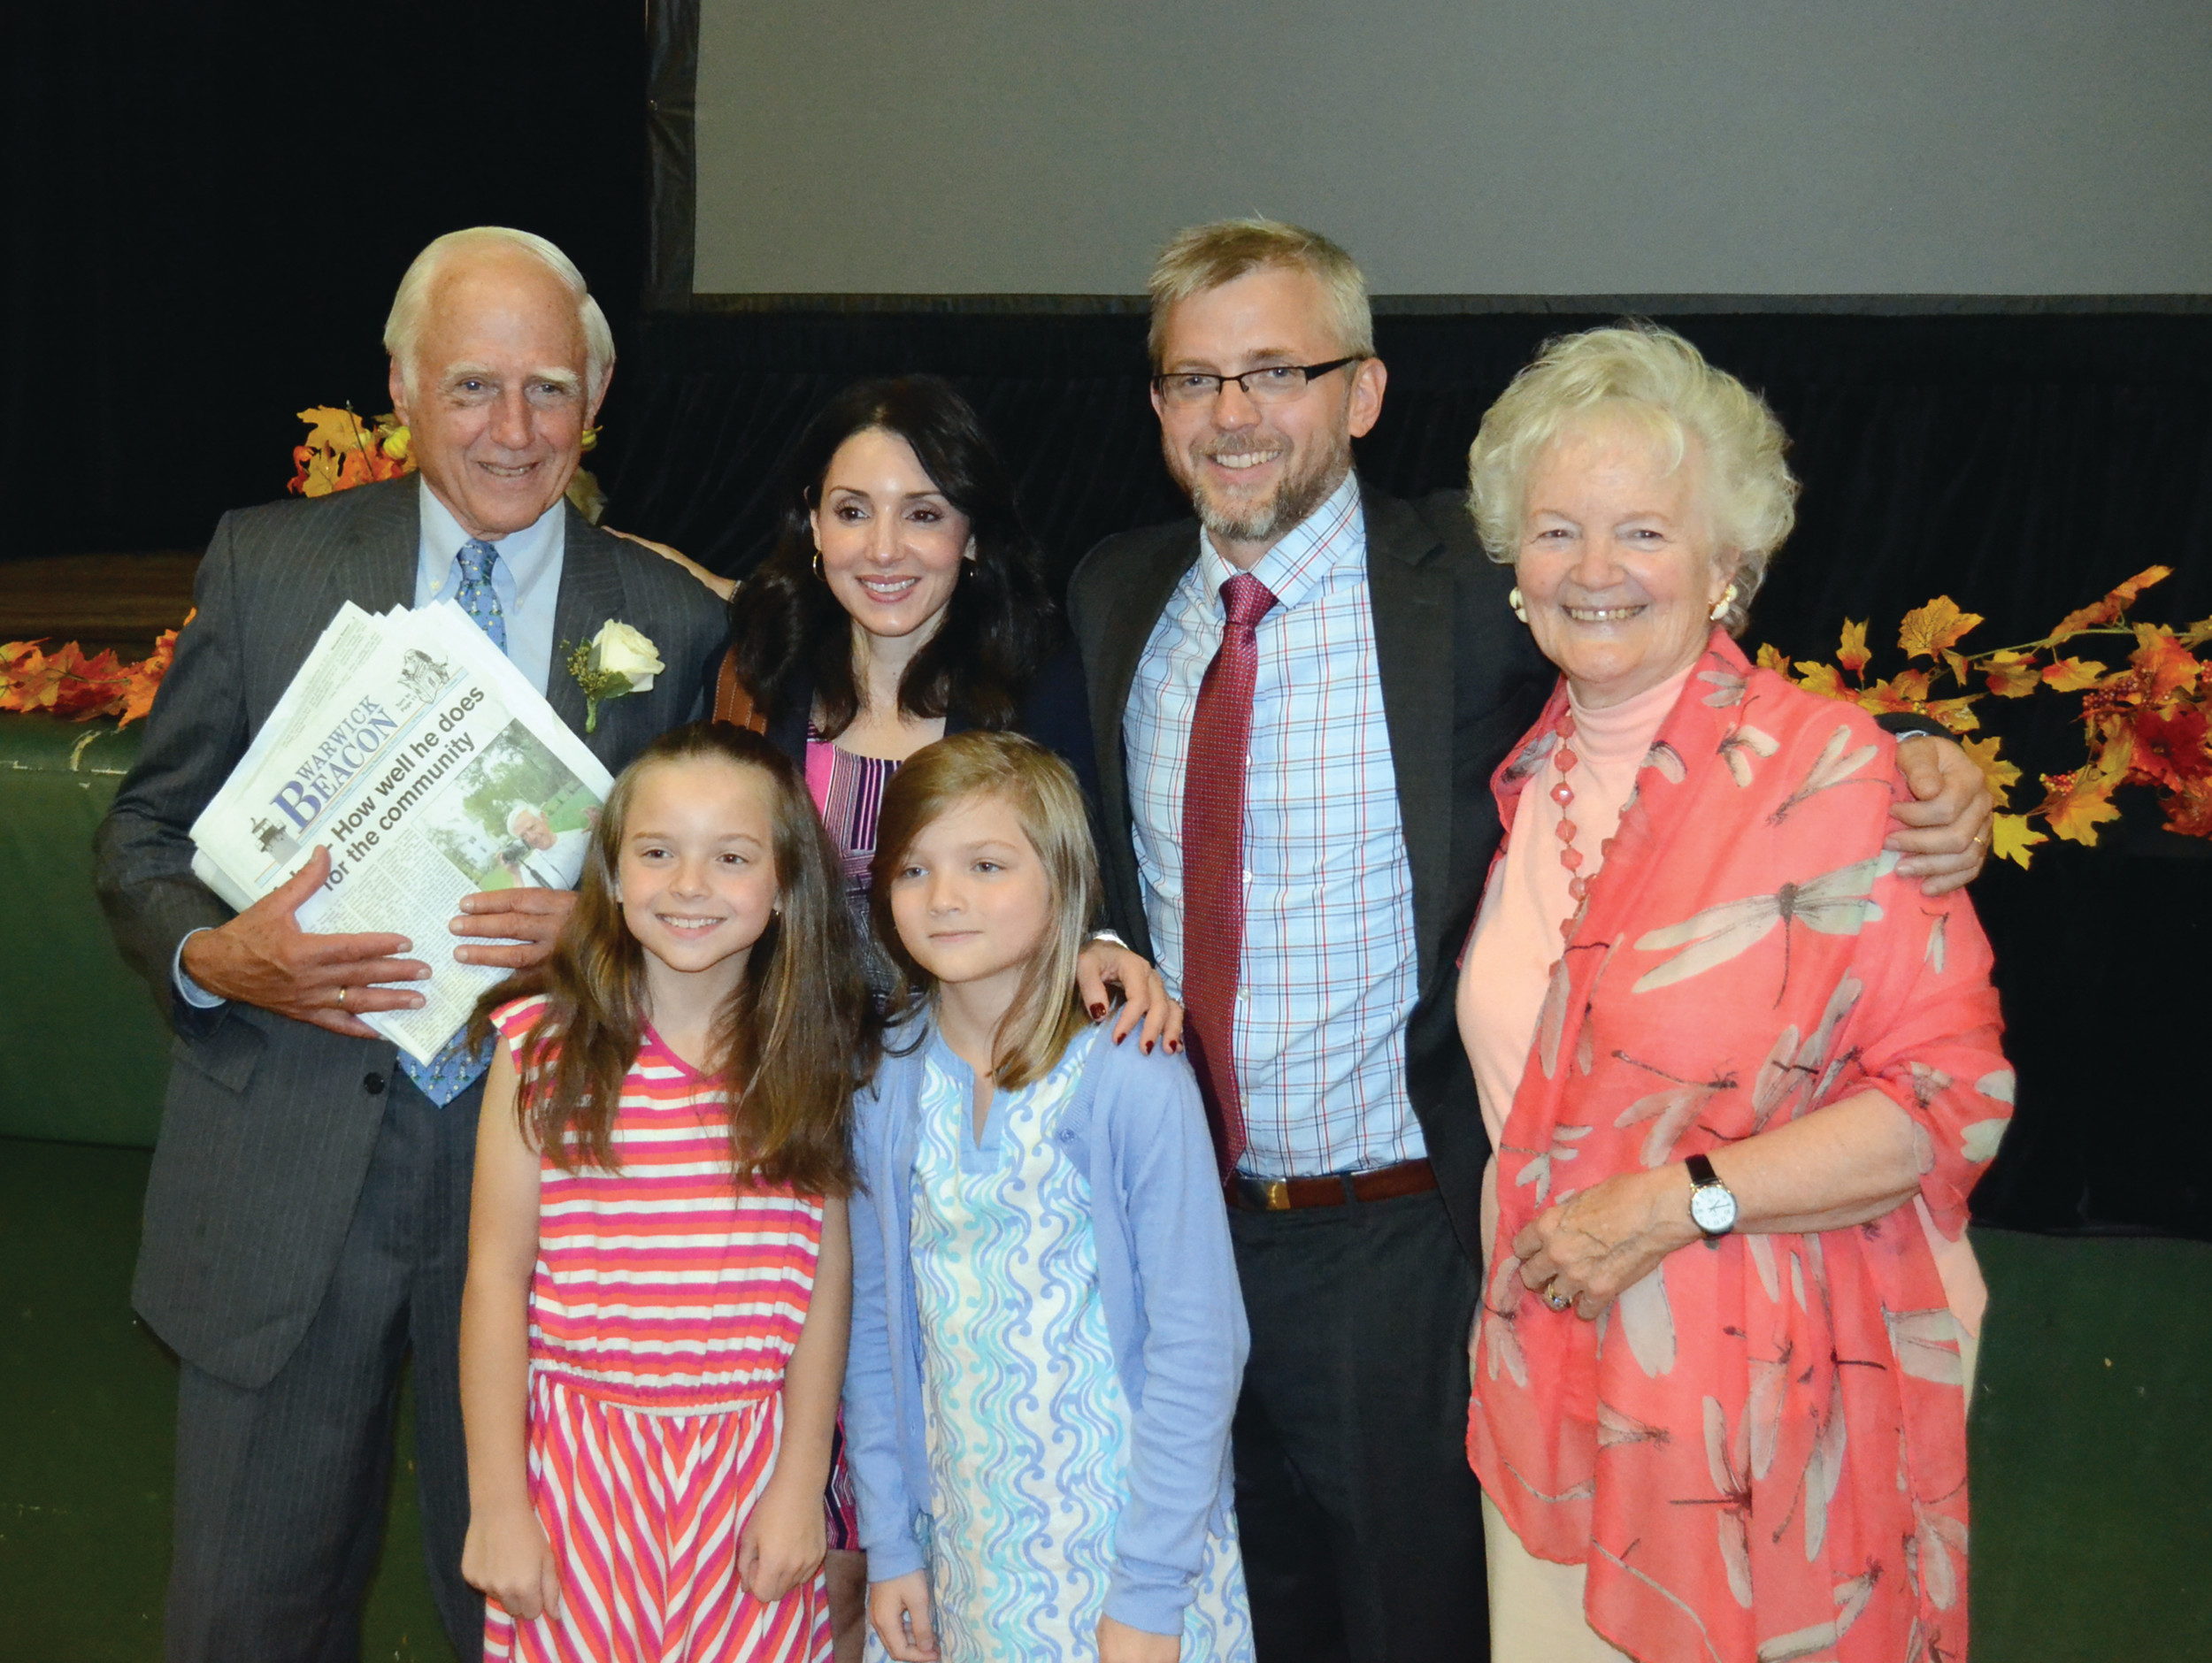 SOURCES OF INSPIRATION: John Howell with his immediate family members that were able to attend the evening, including his wife Carol, son Ted, daughter-in-law Erica and granddaughters Alexandra and Sydney.